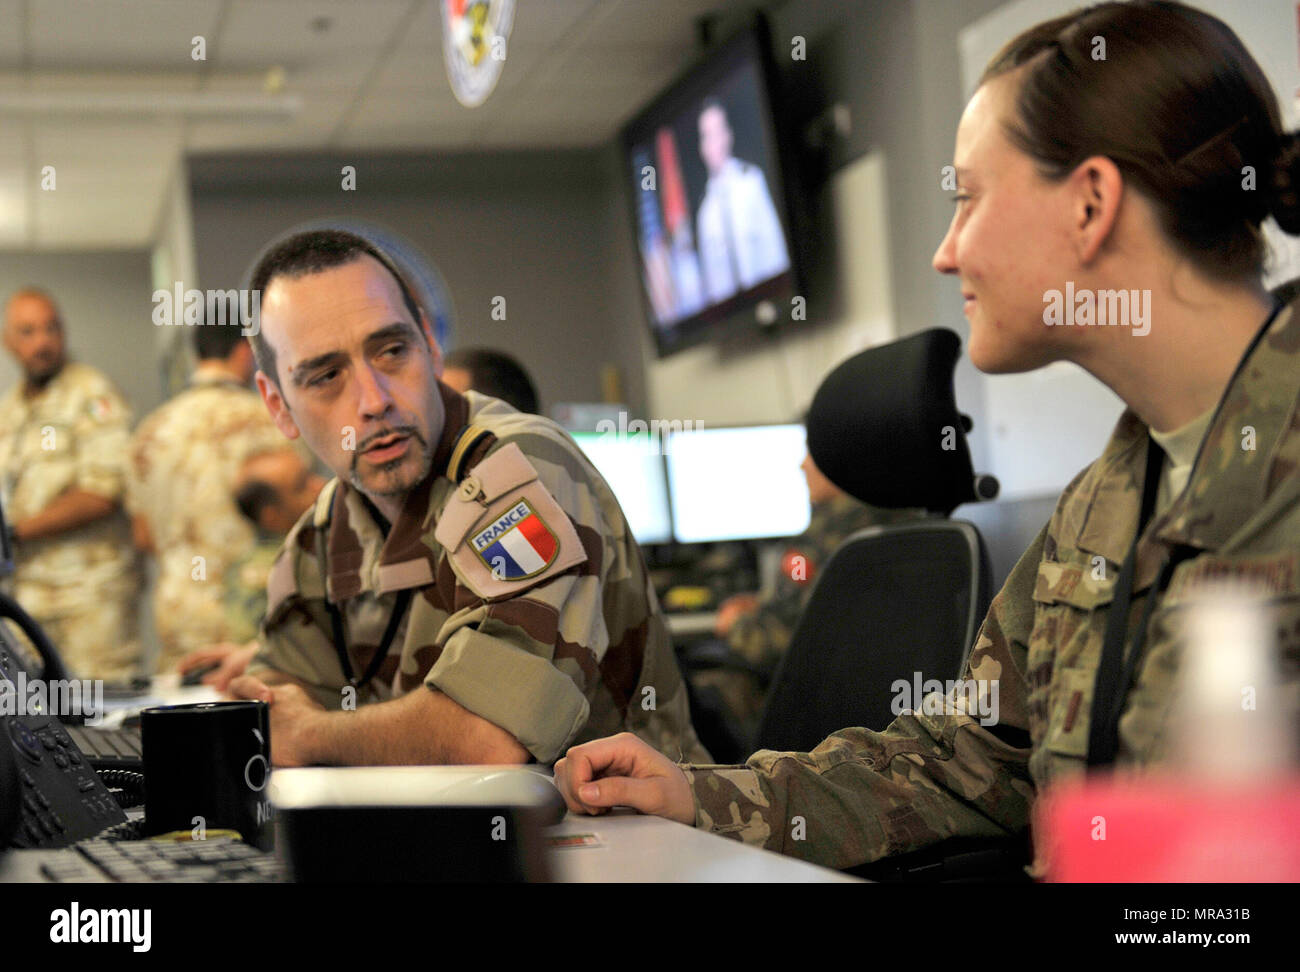 A member of the French air force speaks with a U.S. Airman in the Combined Air Operation Center May 27, 2017, at Al Udeid Air Base, Qatar. The Coalition Forces in the CAOC are responsible for command and control of air power within the Central Command area of responsibility. (U.S. Air Force photo by Staff Sgt. Desiree Economides) Stock Photo